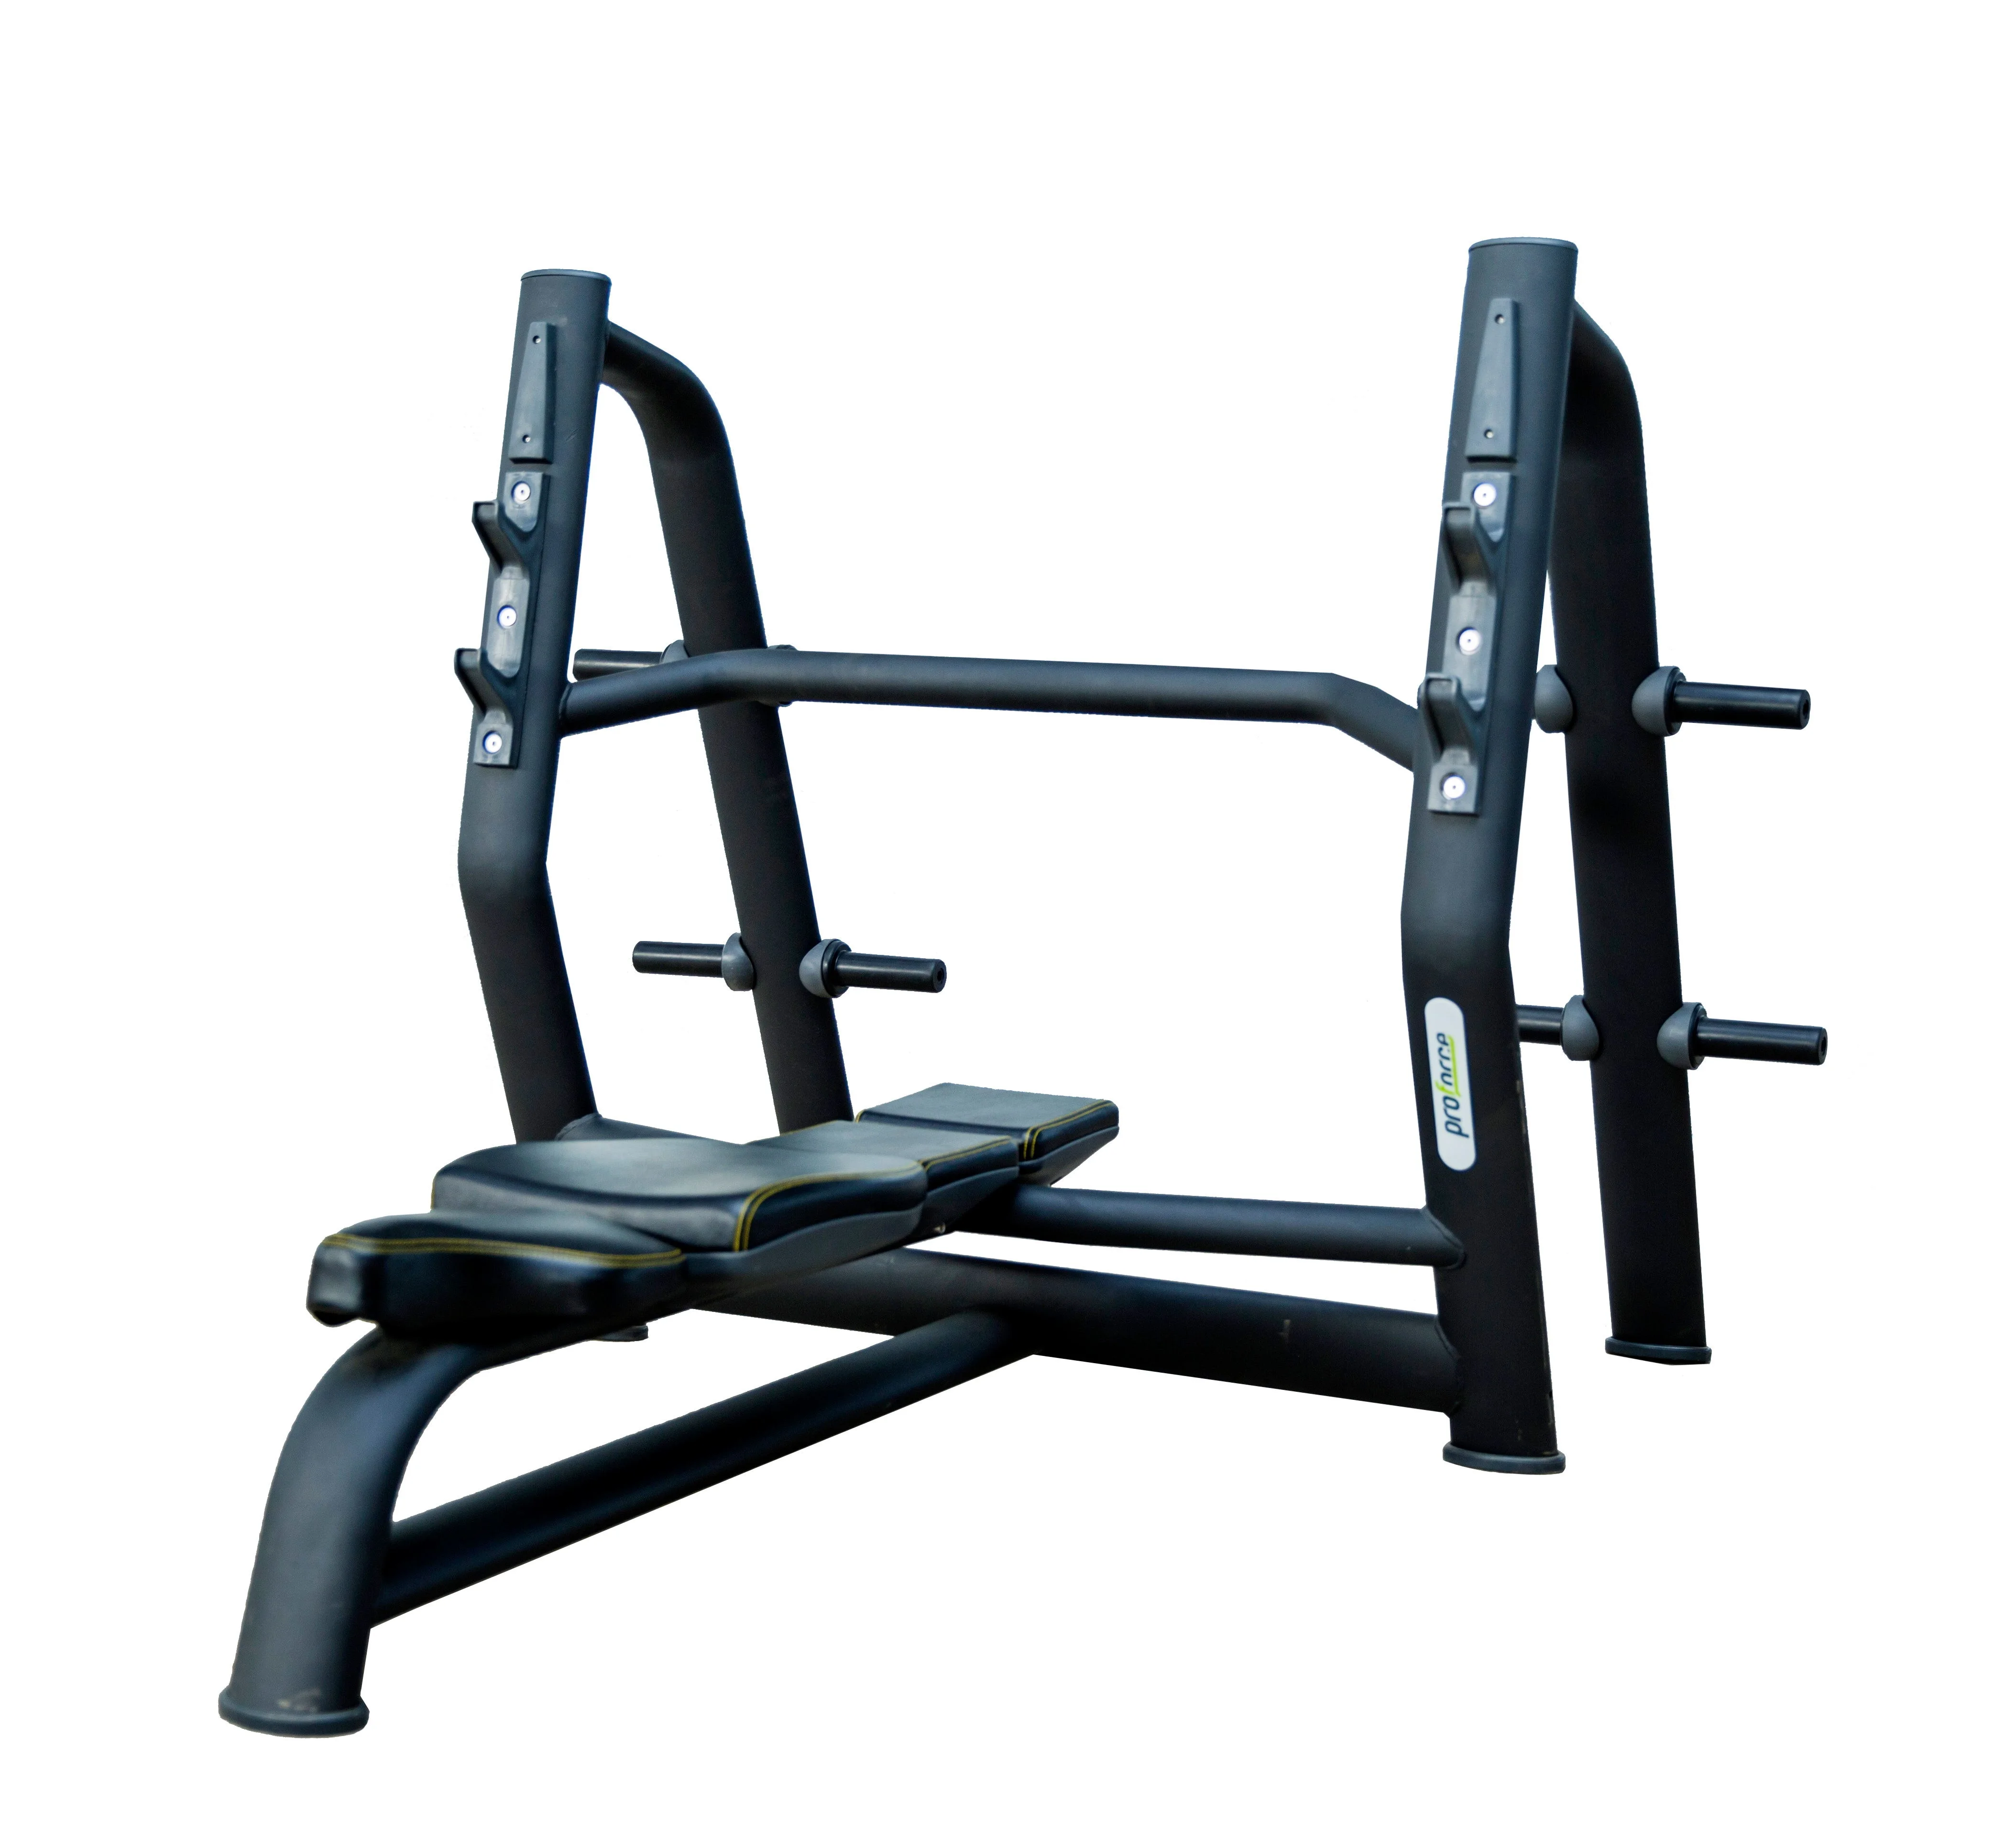 15 Minute Gym equipment alibaba india for Workout at Home